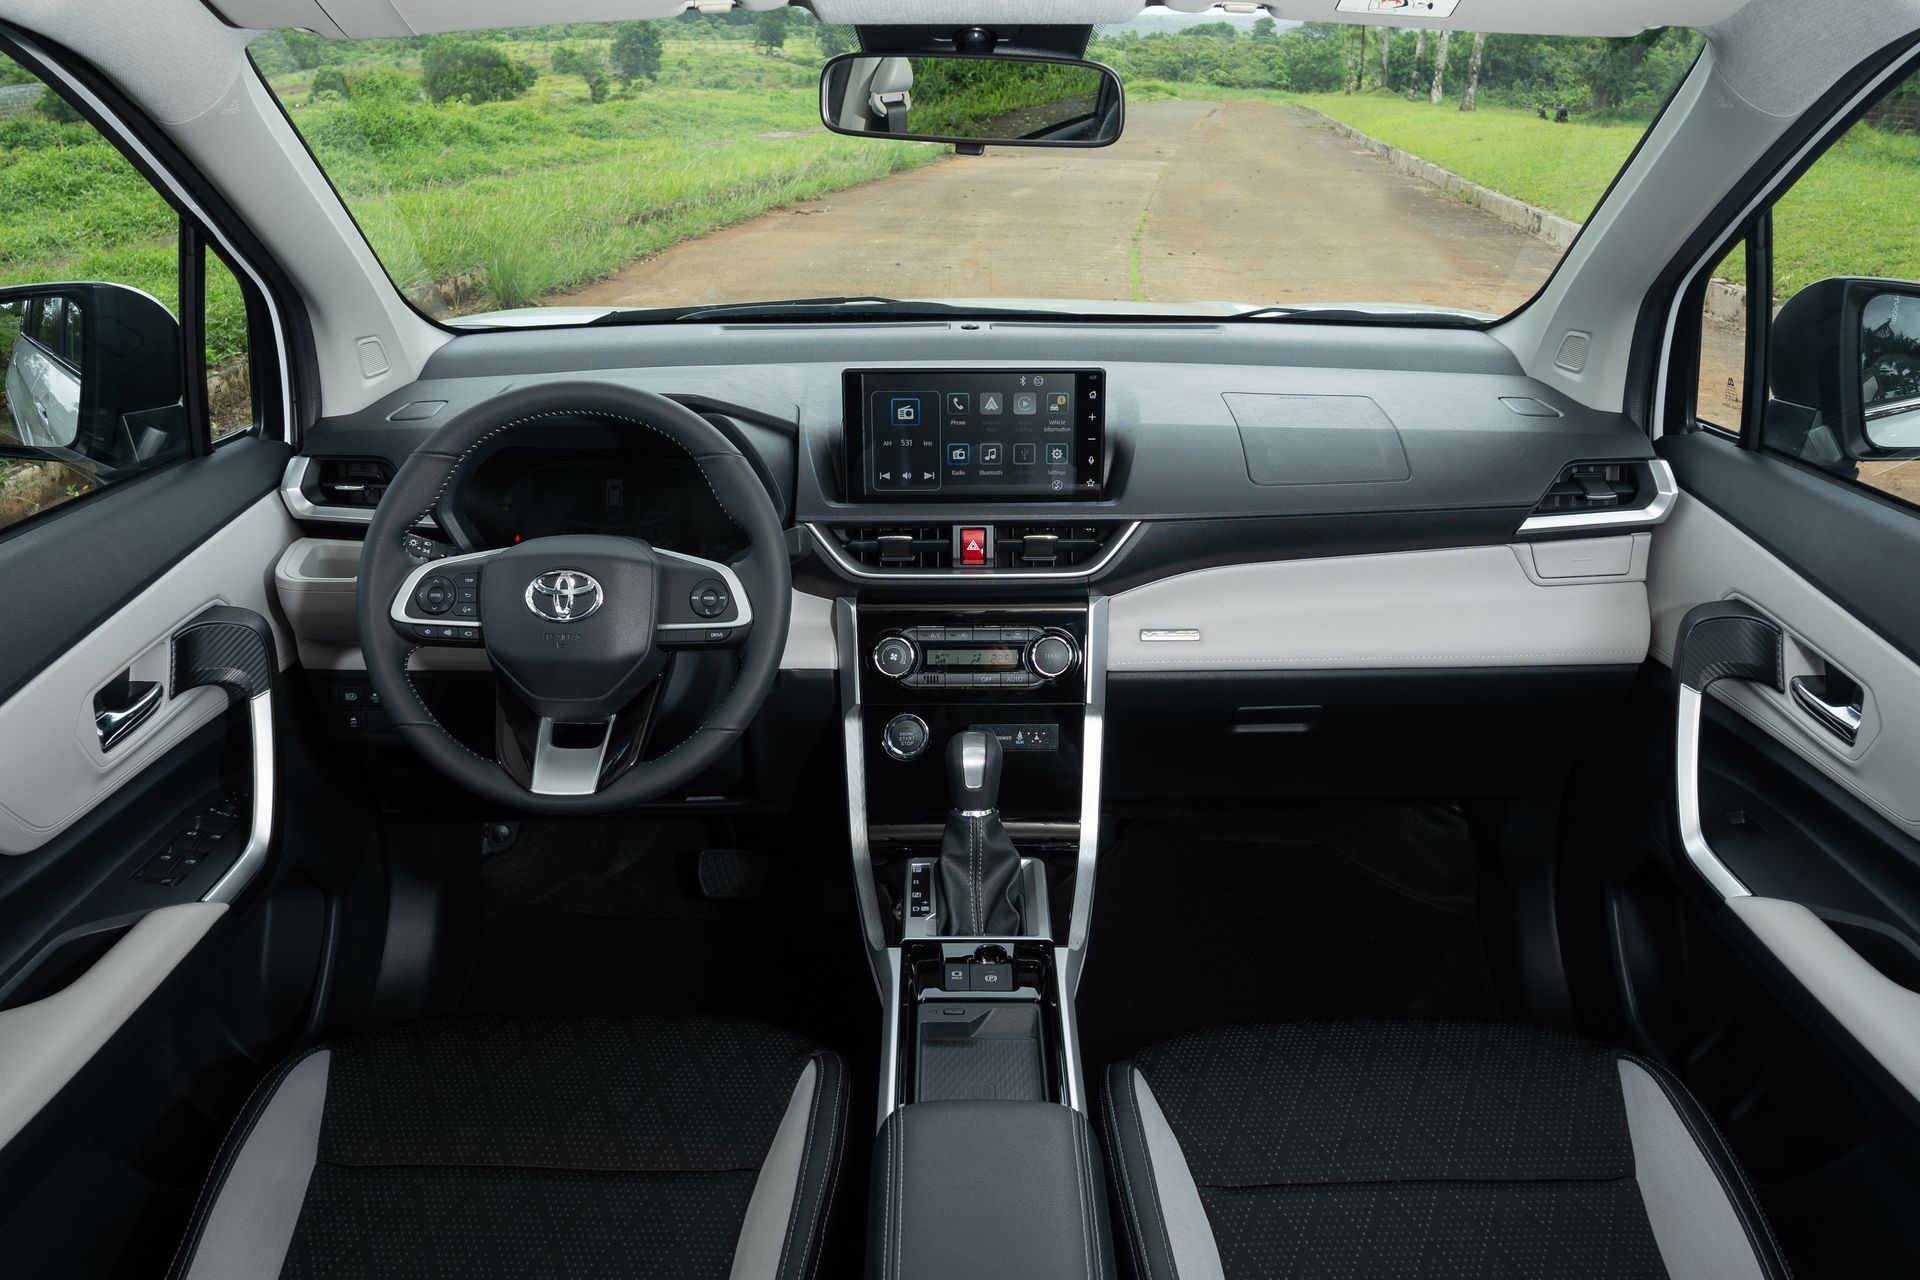 Toyota Veloz with a luxurious interior, perfect for VIP car rental services in Palawan, specifically in Puerto Princesa.